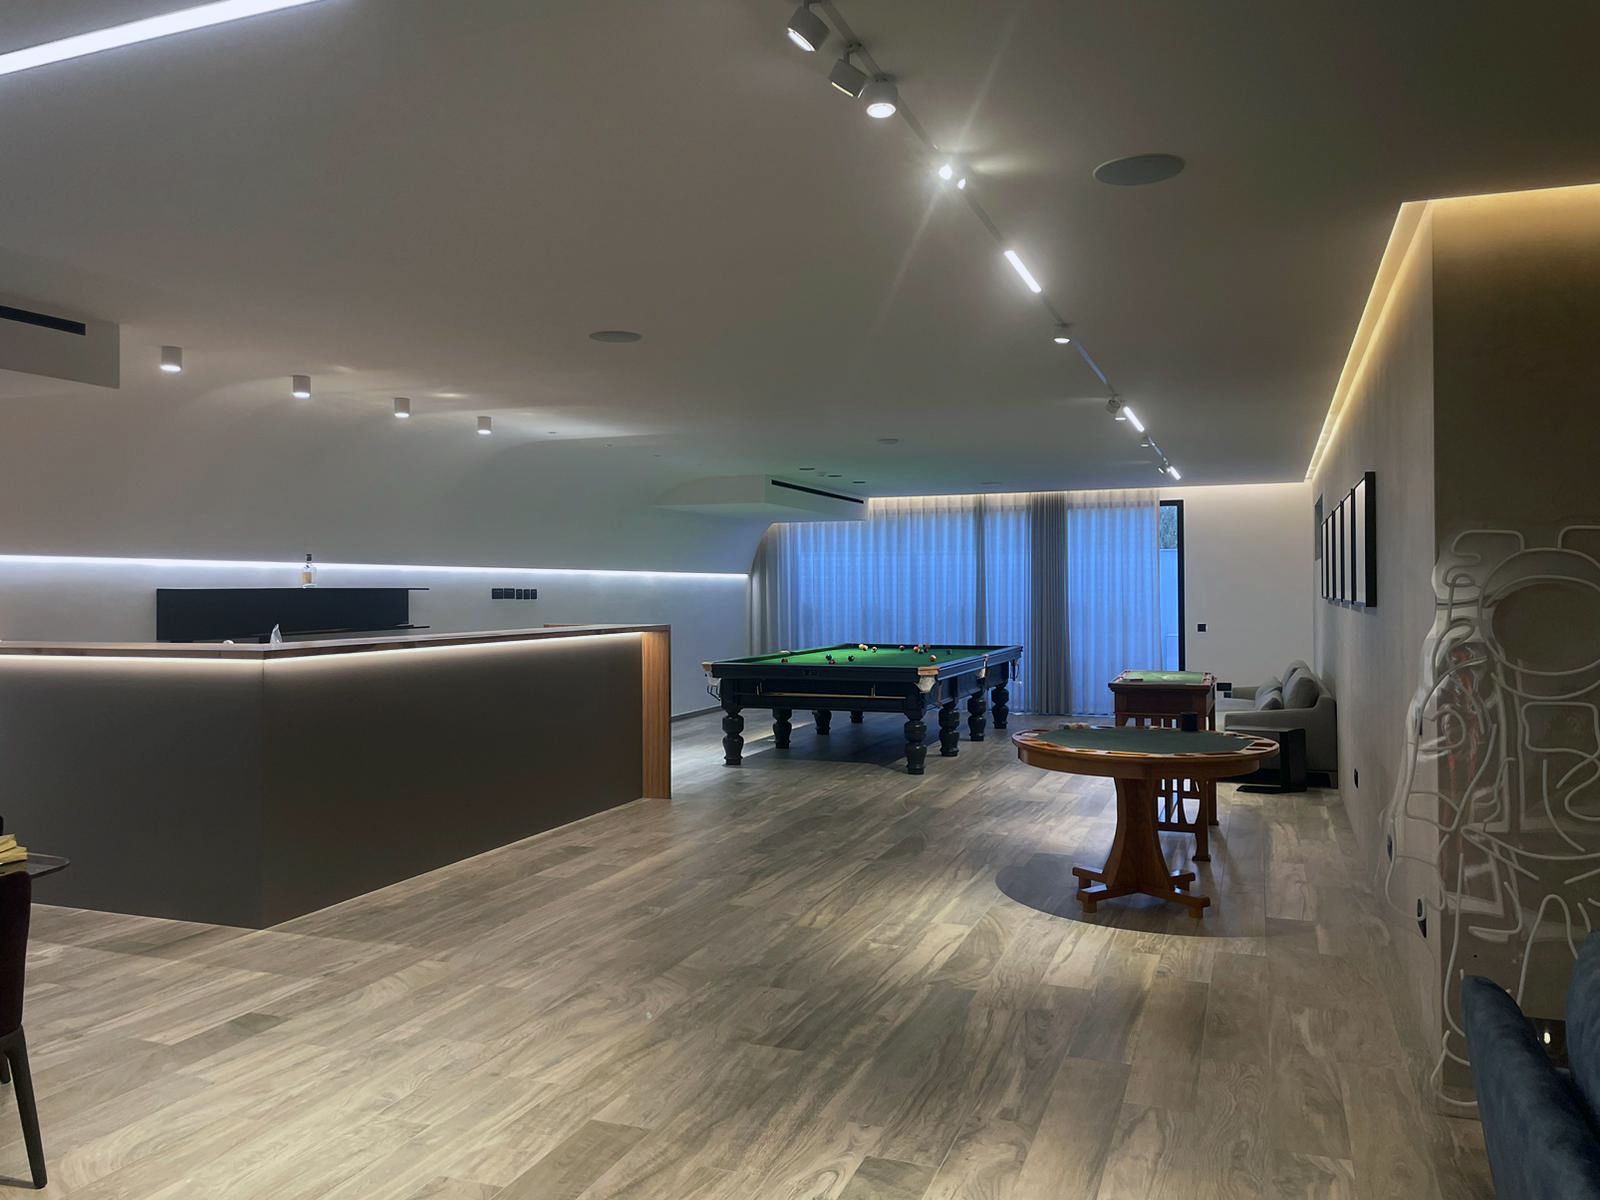 Astral projects games room area smart lighting system